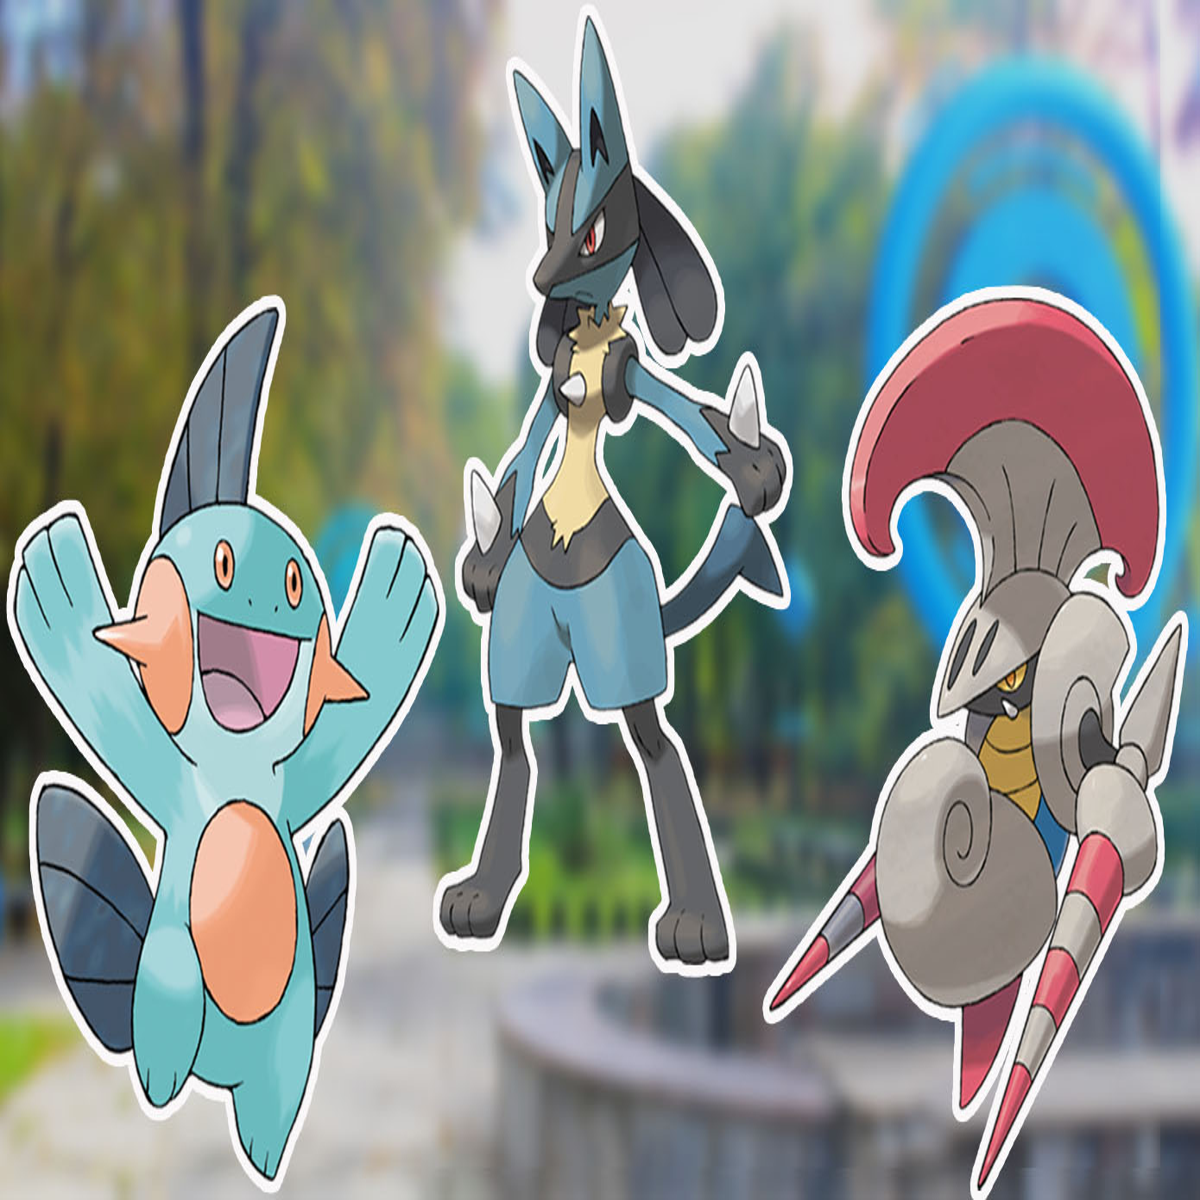 What are your thoughts on shiny (mega) Lucario? : r/pokemon